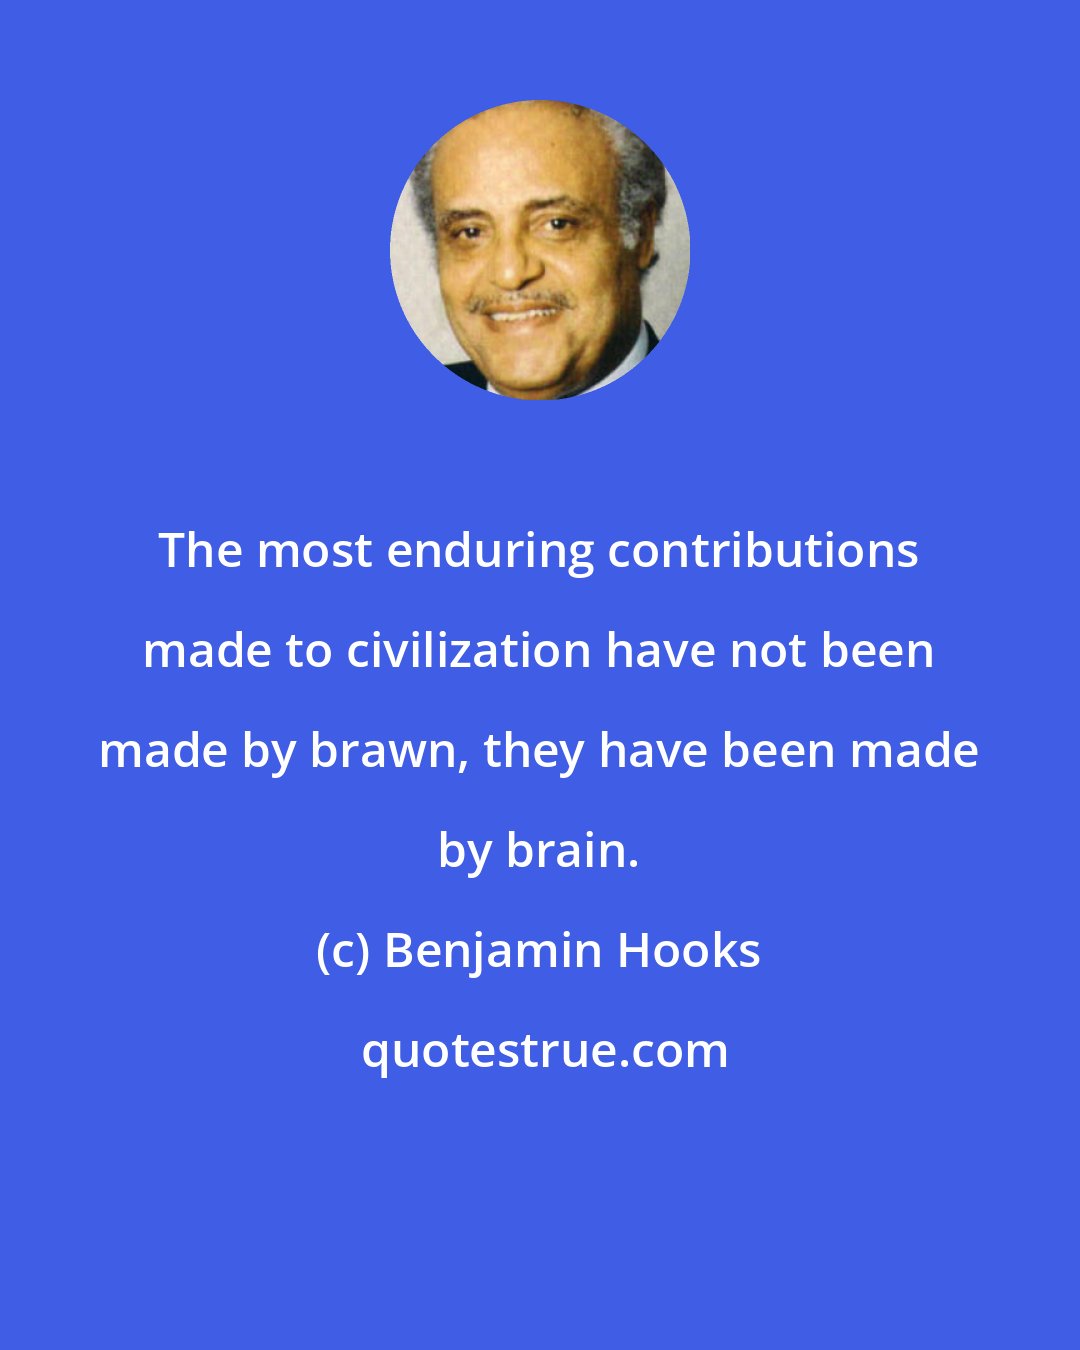 Benjamin Hooks: The most enduring contributions made to civilization have not been made by brawn, they have been made by brain.